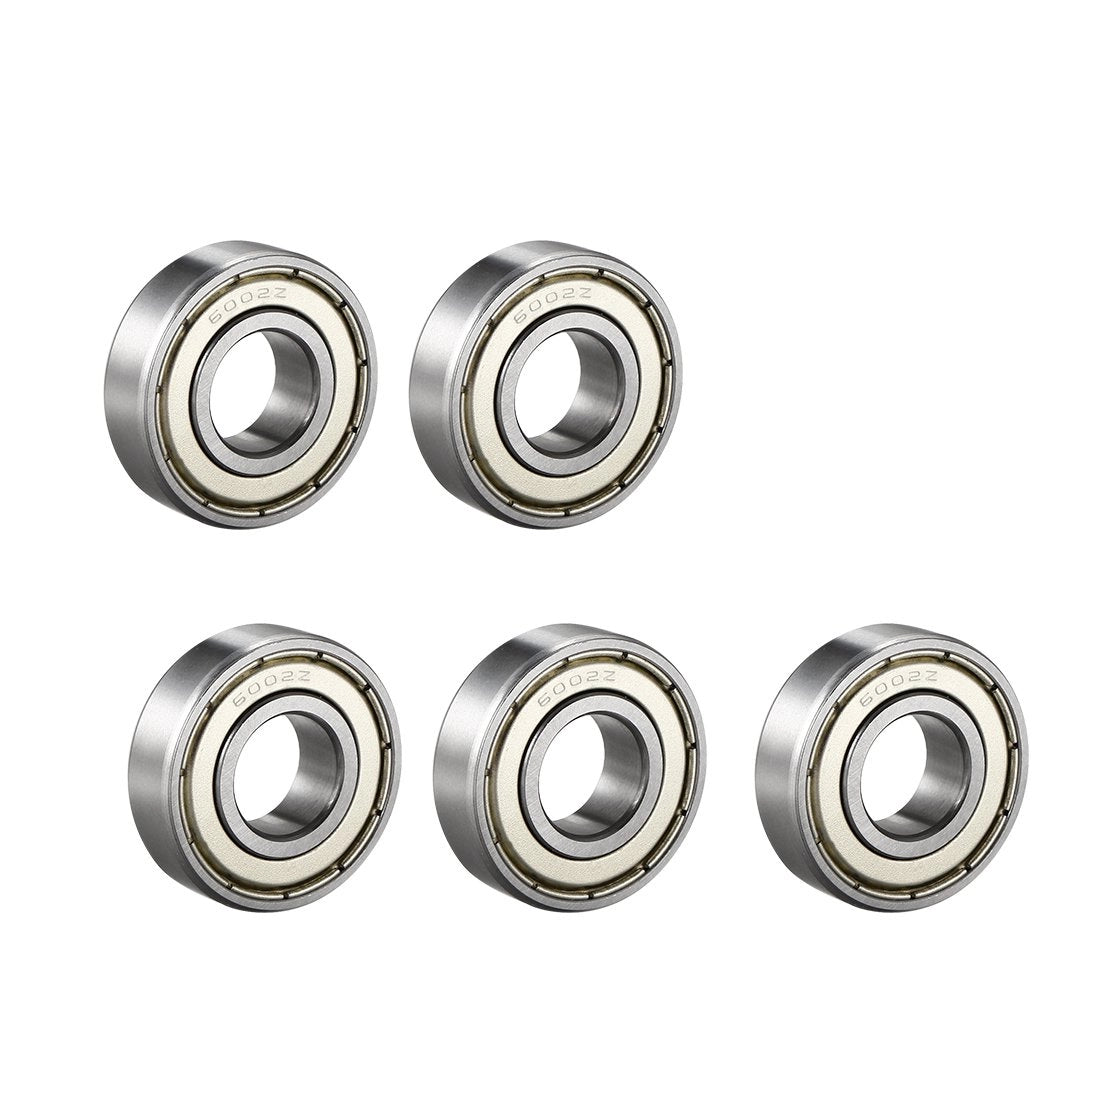 uxcell 6002Z Deep Groove Ball Bearing Single Shield 160102, 15mm x 32mm x 9mm Chrome Steel Bearings (Pack of 5)